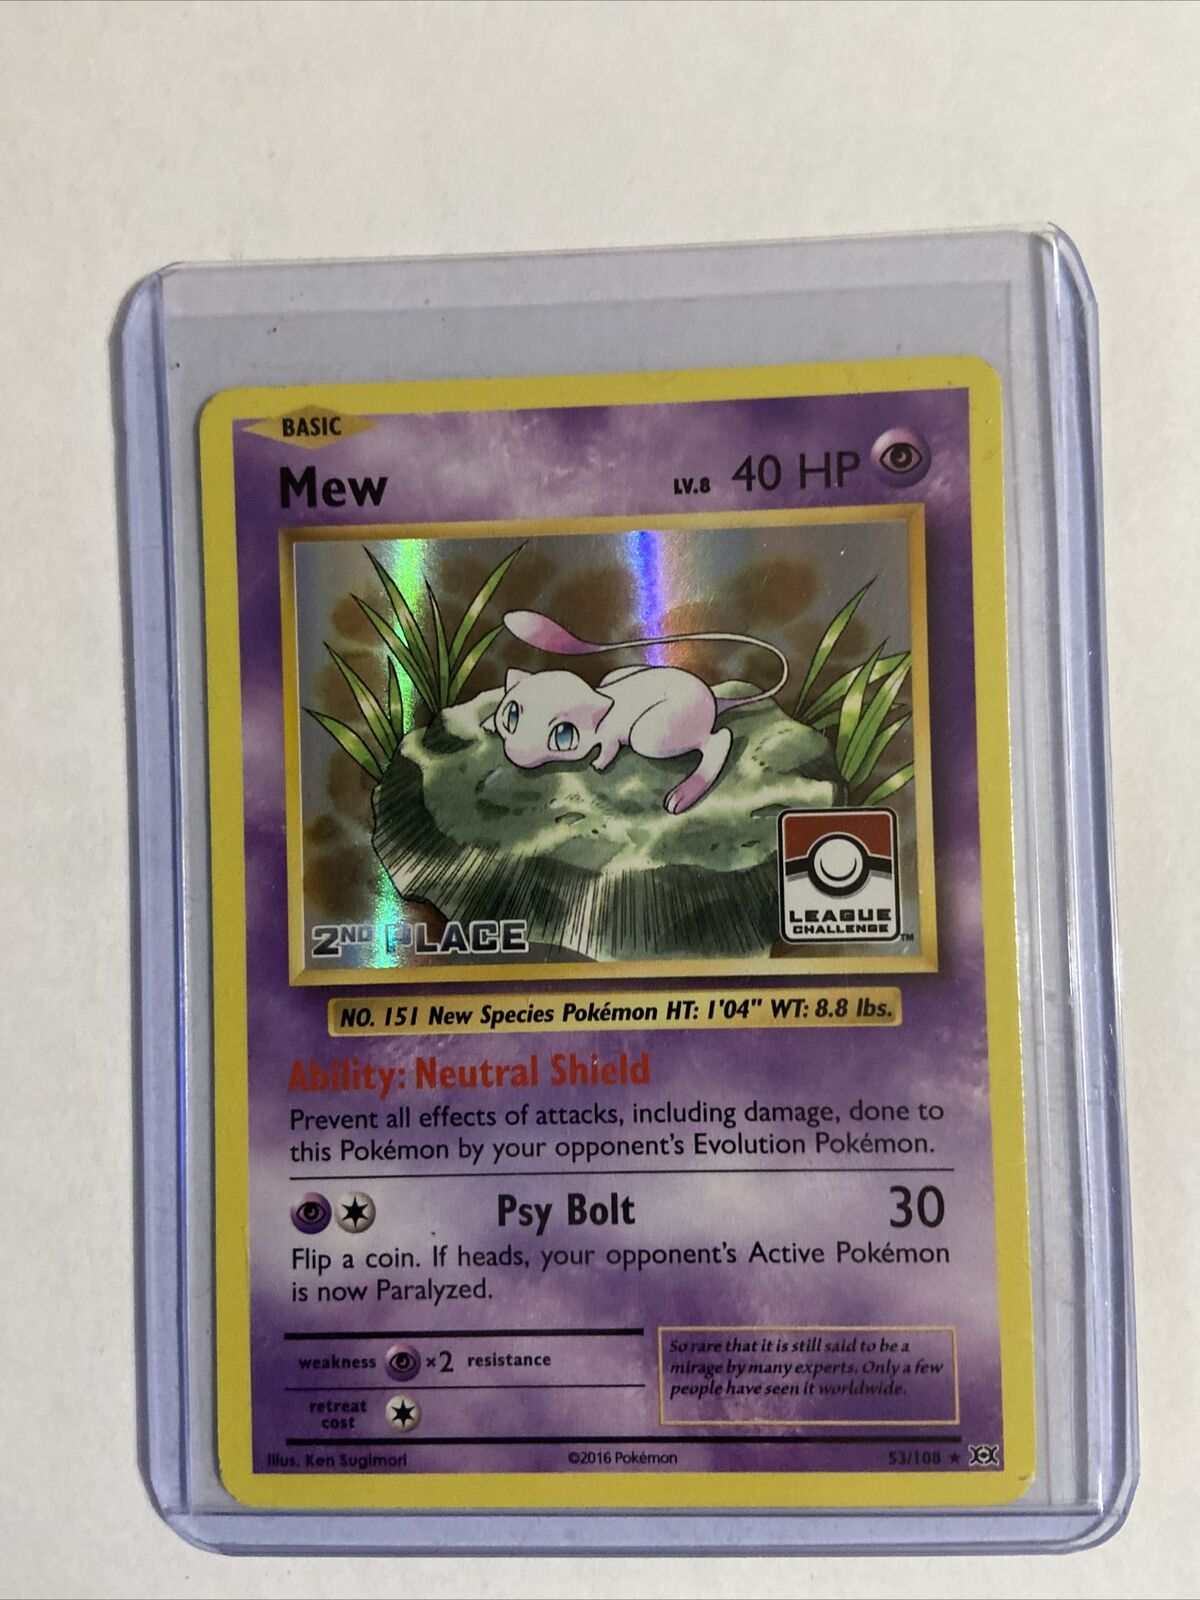 Pokemon Evolutions Mew 2nd Place League Challenge Promo Trophy Card 53/108 - NM